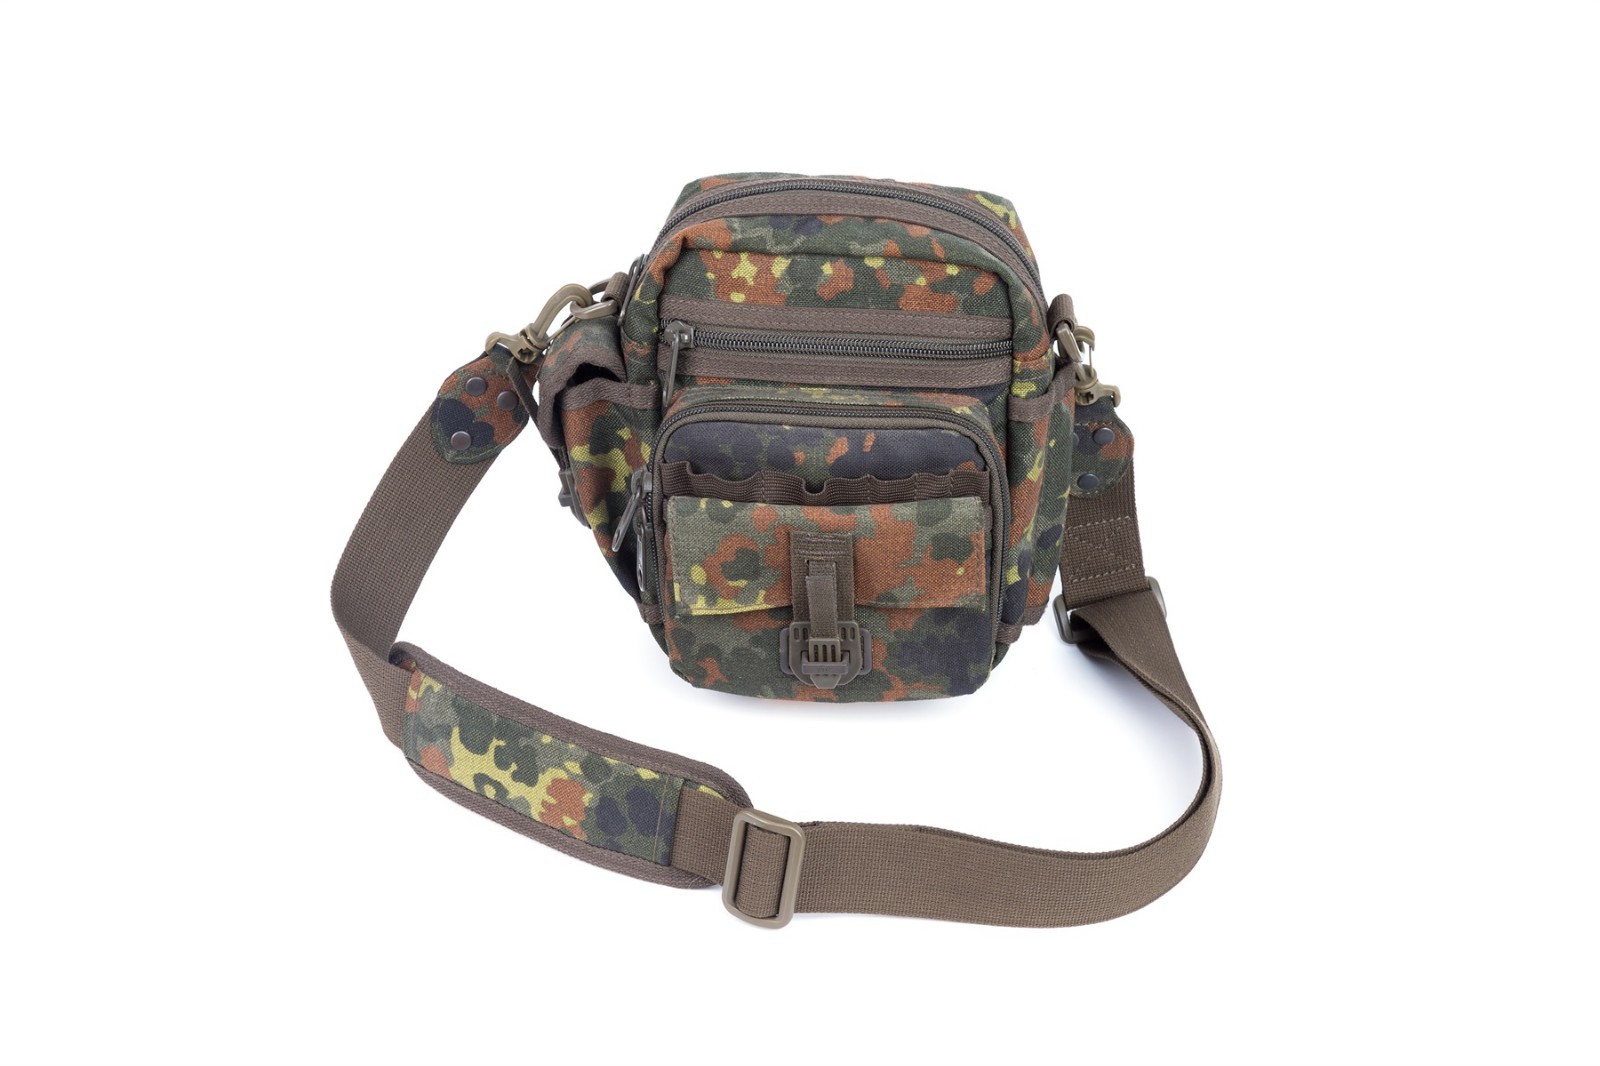 GF bags-Professional Military Gear Bags and Tactical Pouch Bag From GF Bags-8